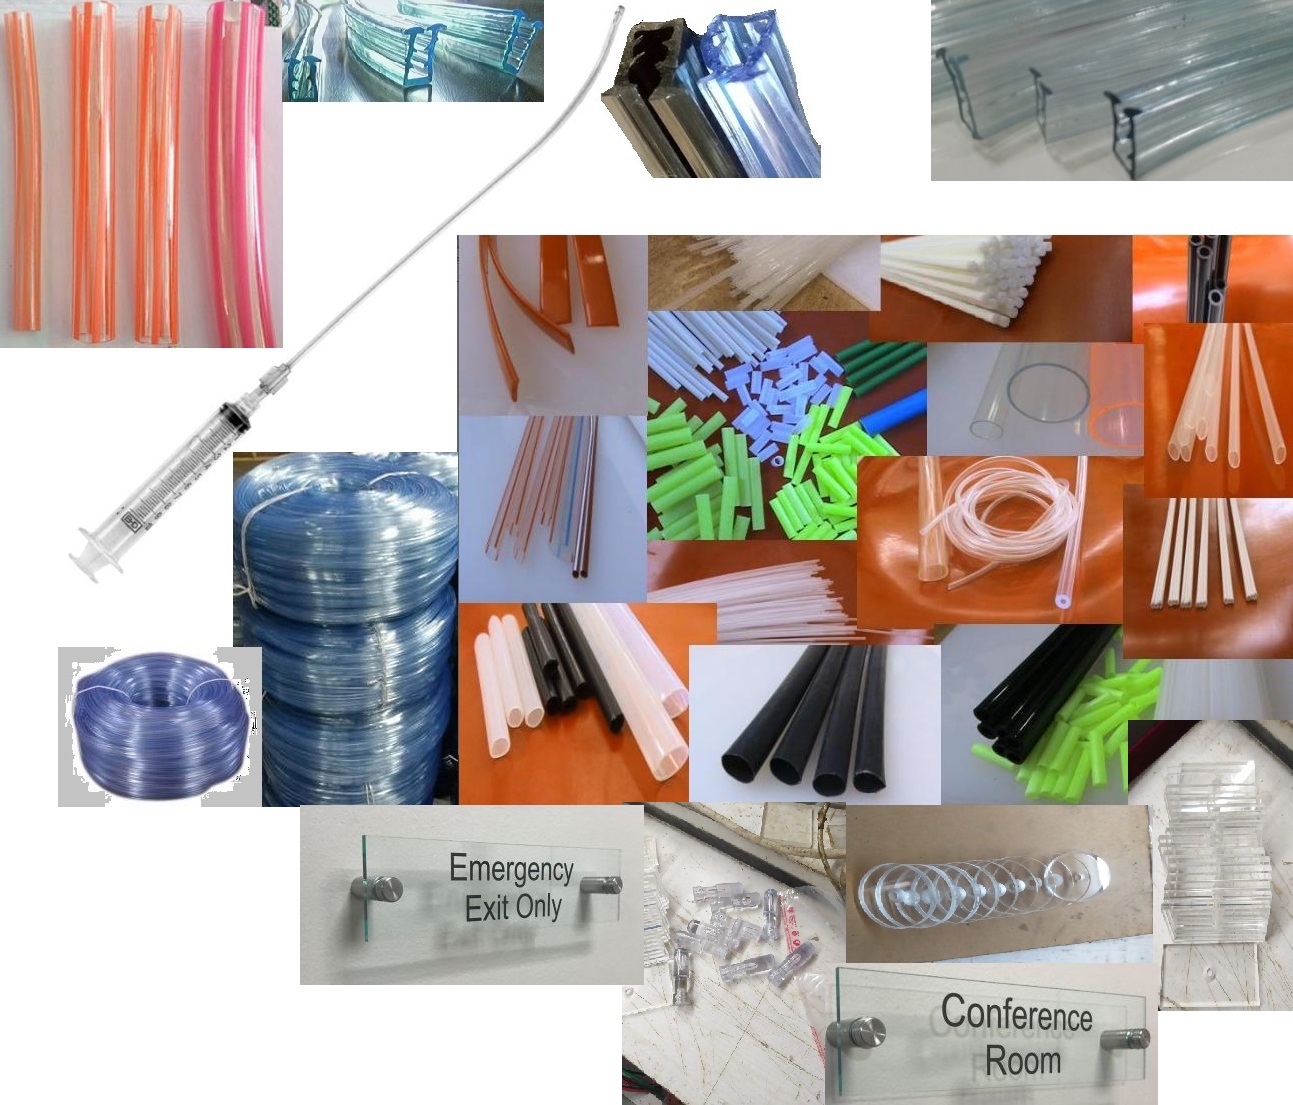 Extrusion items - Pipes, Tubes, Stirrers, Cotton buds sticks, Cannula, Catheters, Acrylic shapes